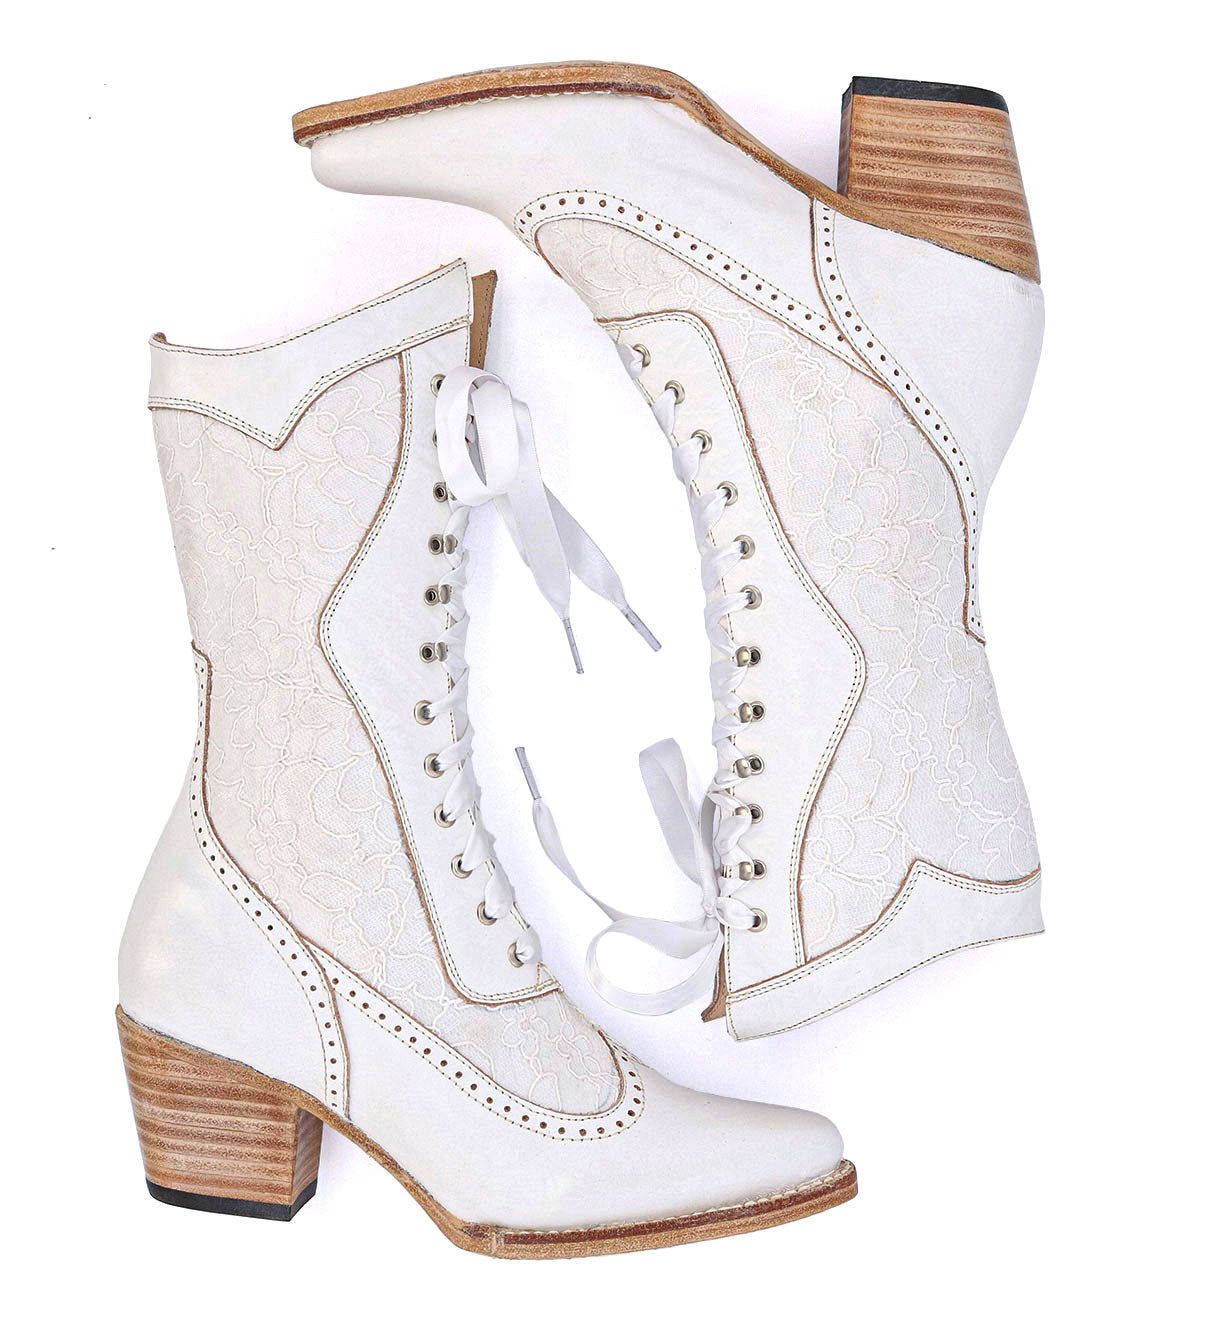 A pair of Oak Tree Farms Biddy white cowboy boots on a white background.